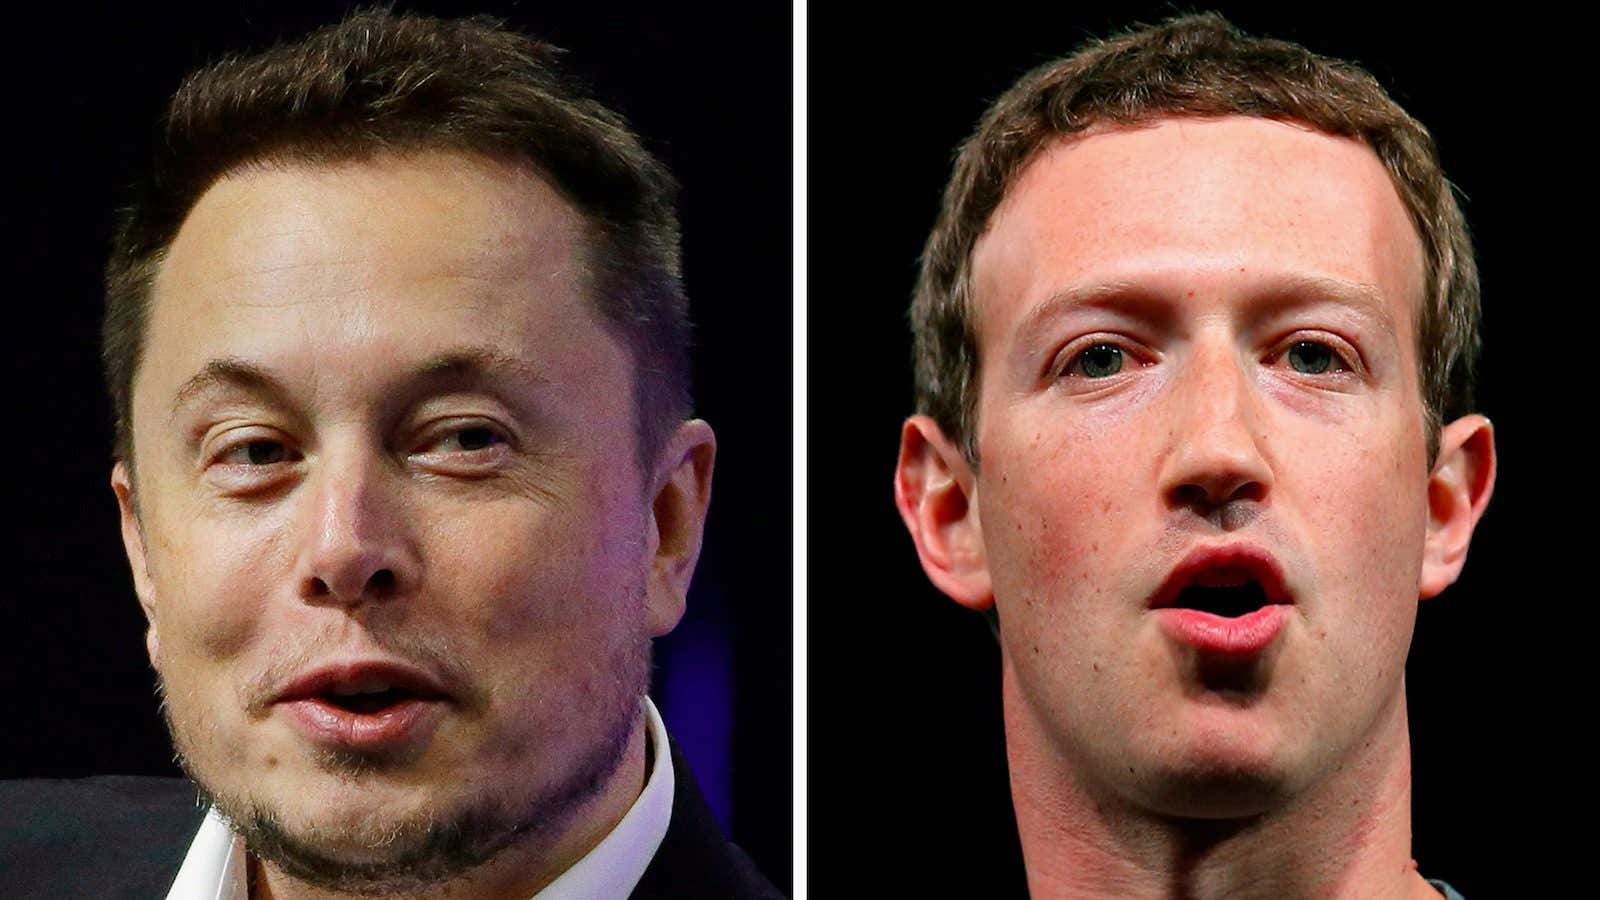 Musk and Zuck need to think less about the robot apocalypse, and more about living alongside them.